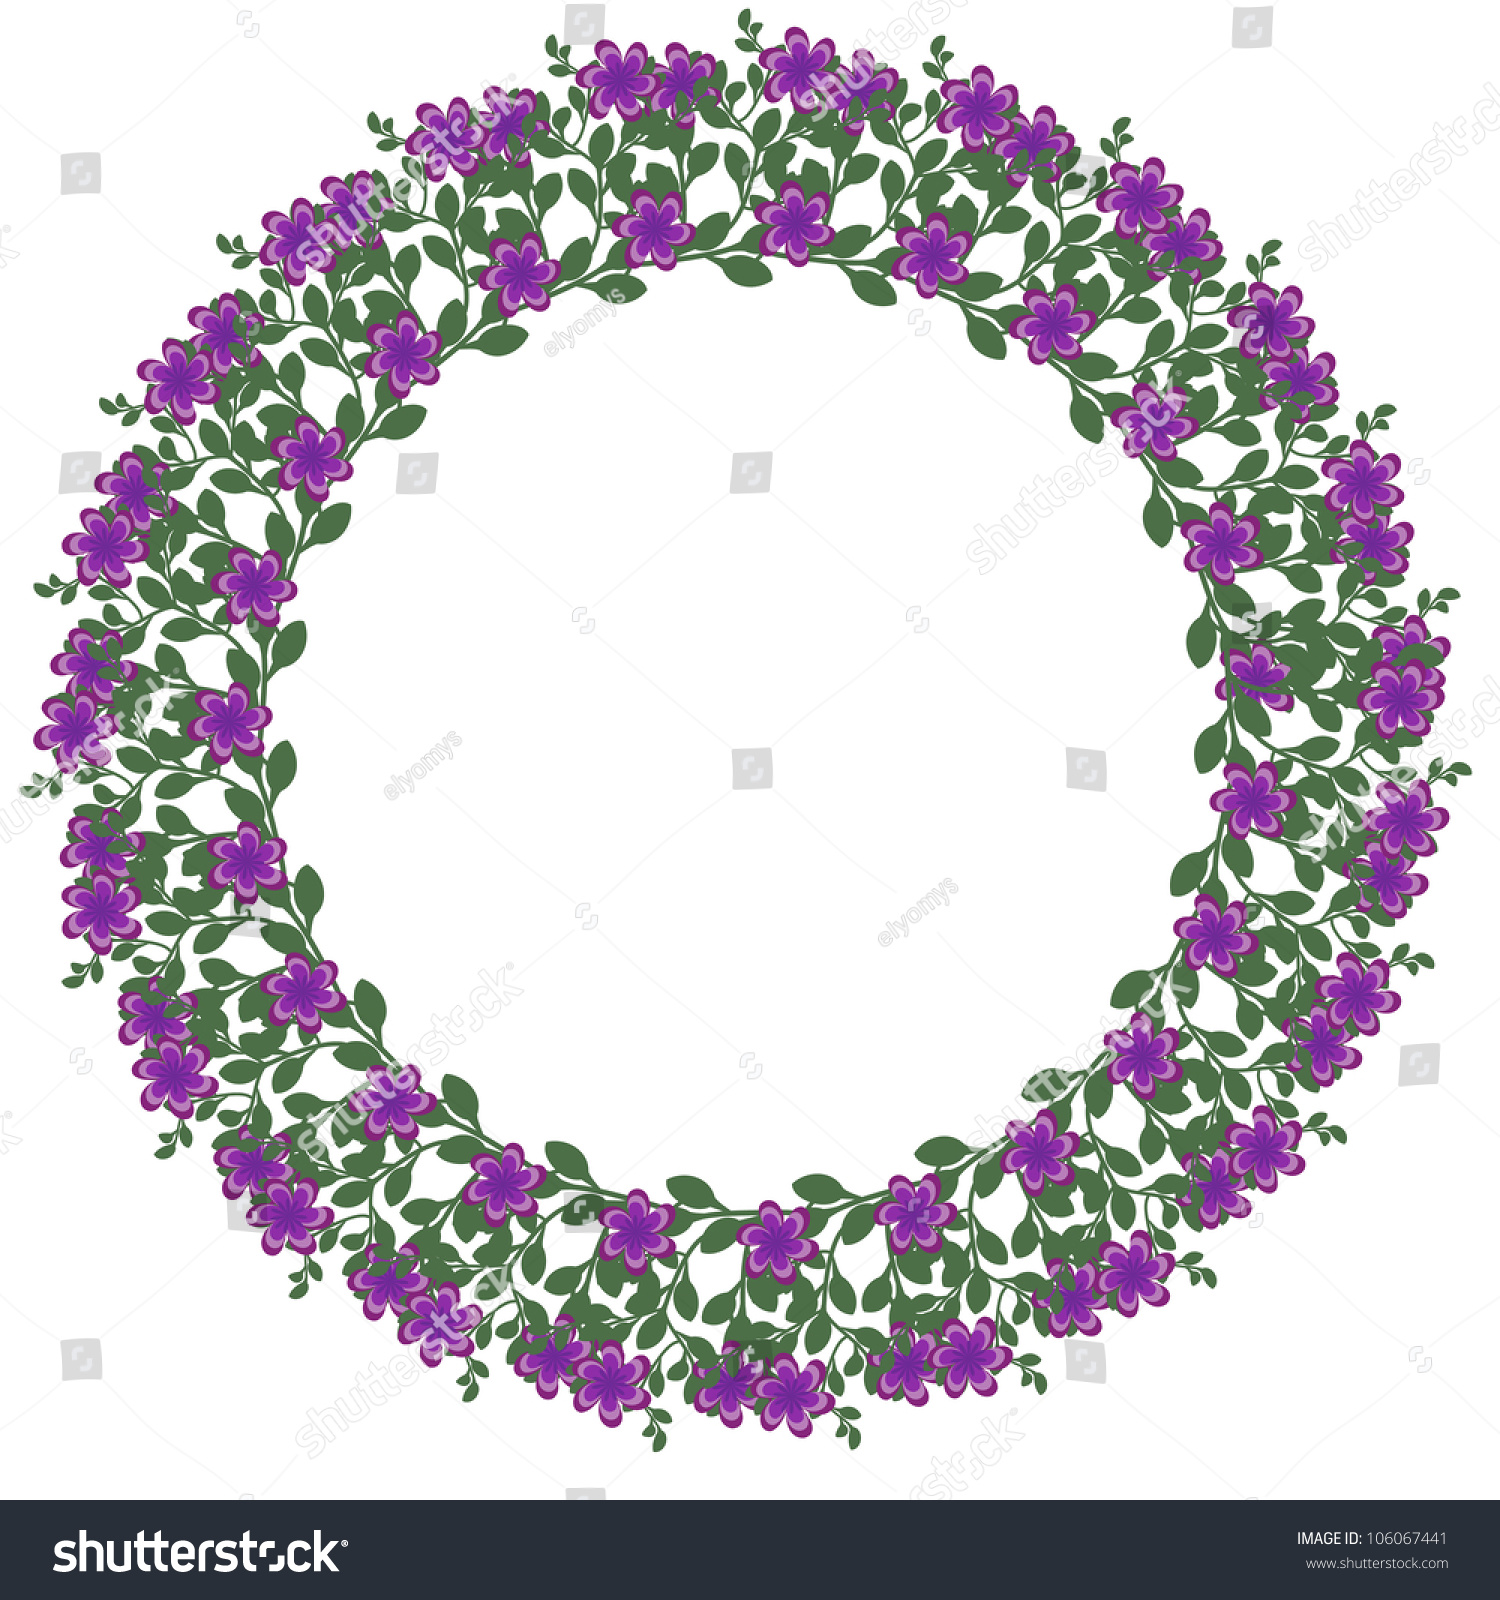 Floral Wreath With Purple Flowers Stock Vector Illustration 106067441